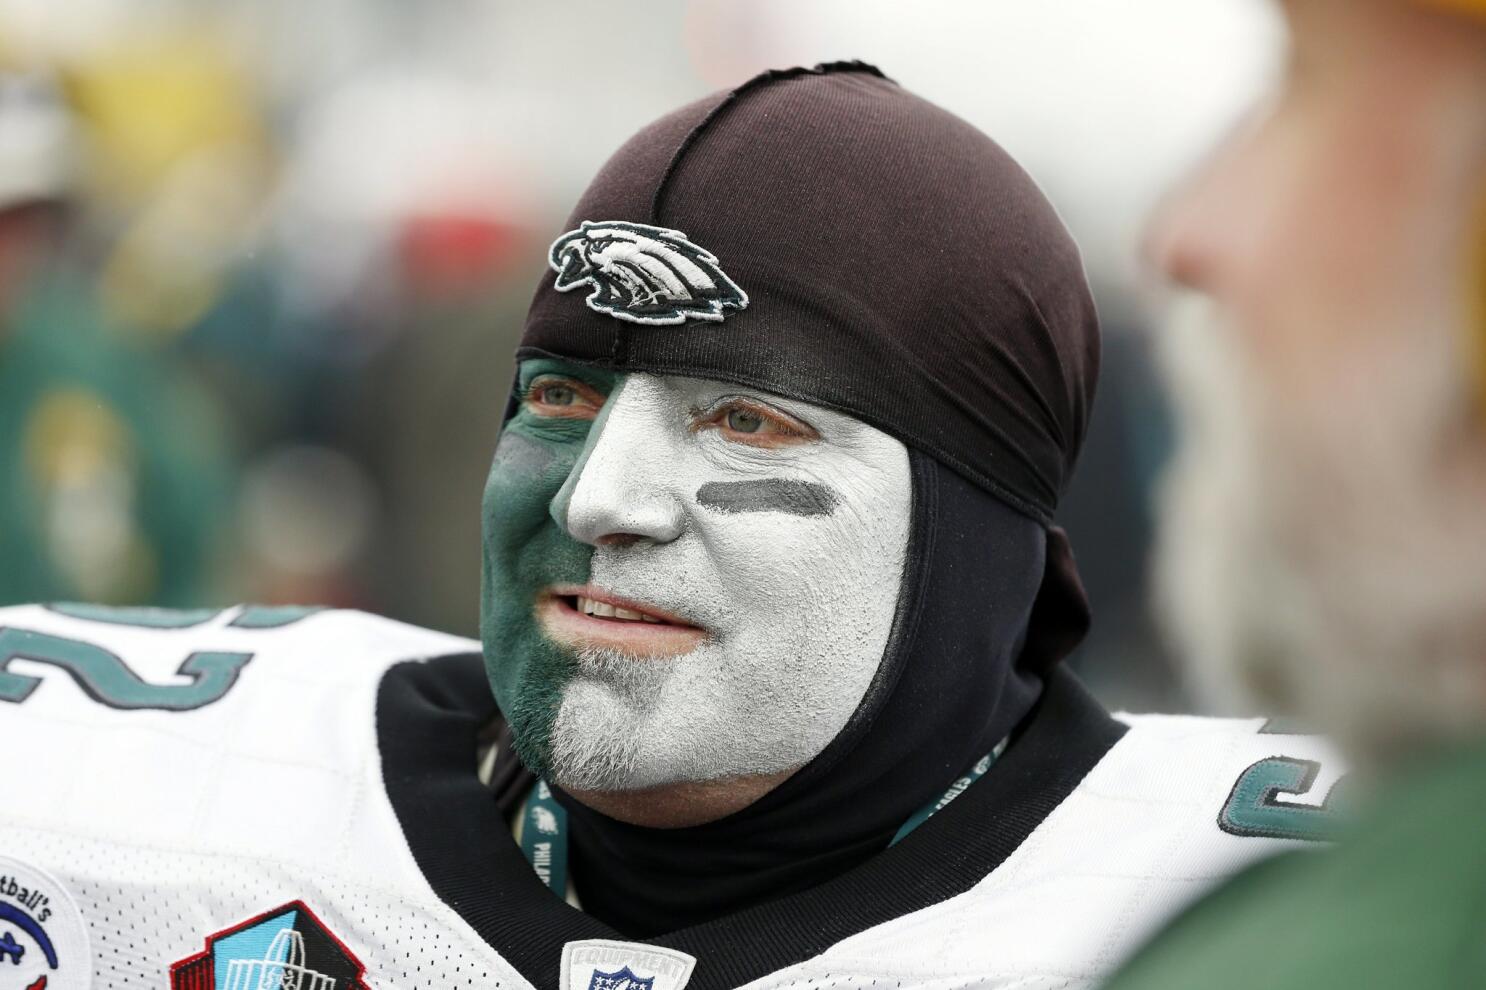 Super Fan: Guy Wears Different Eagles Jersey and Hat Everyday